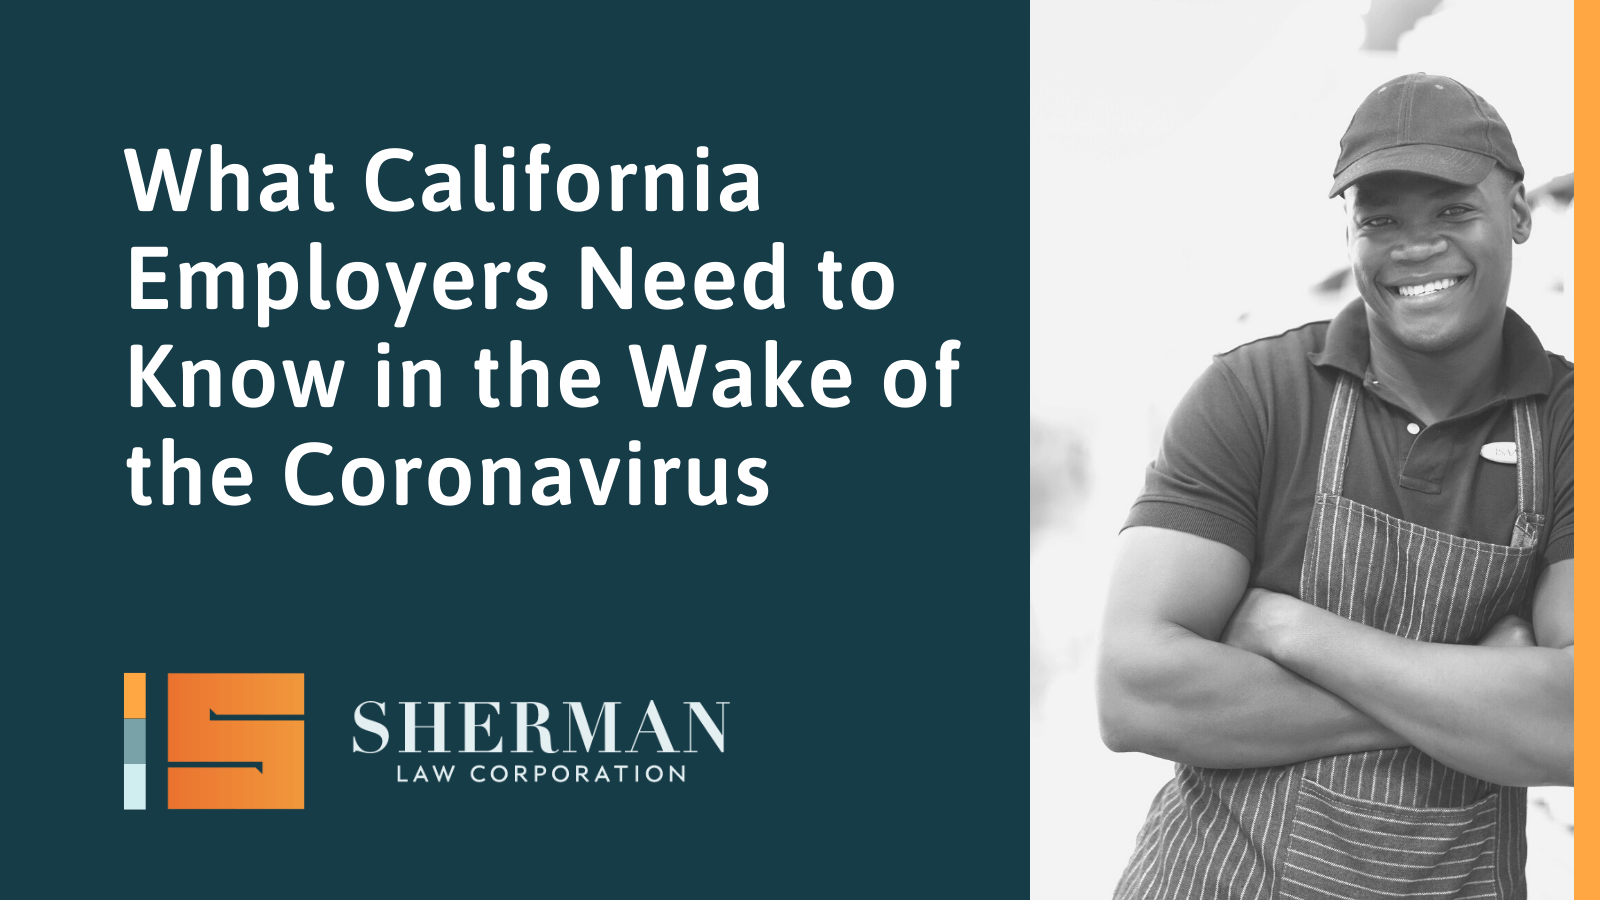 What California Employers Need to Know in the Wake of the Coronavirus - lisa sherman law firm - california